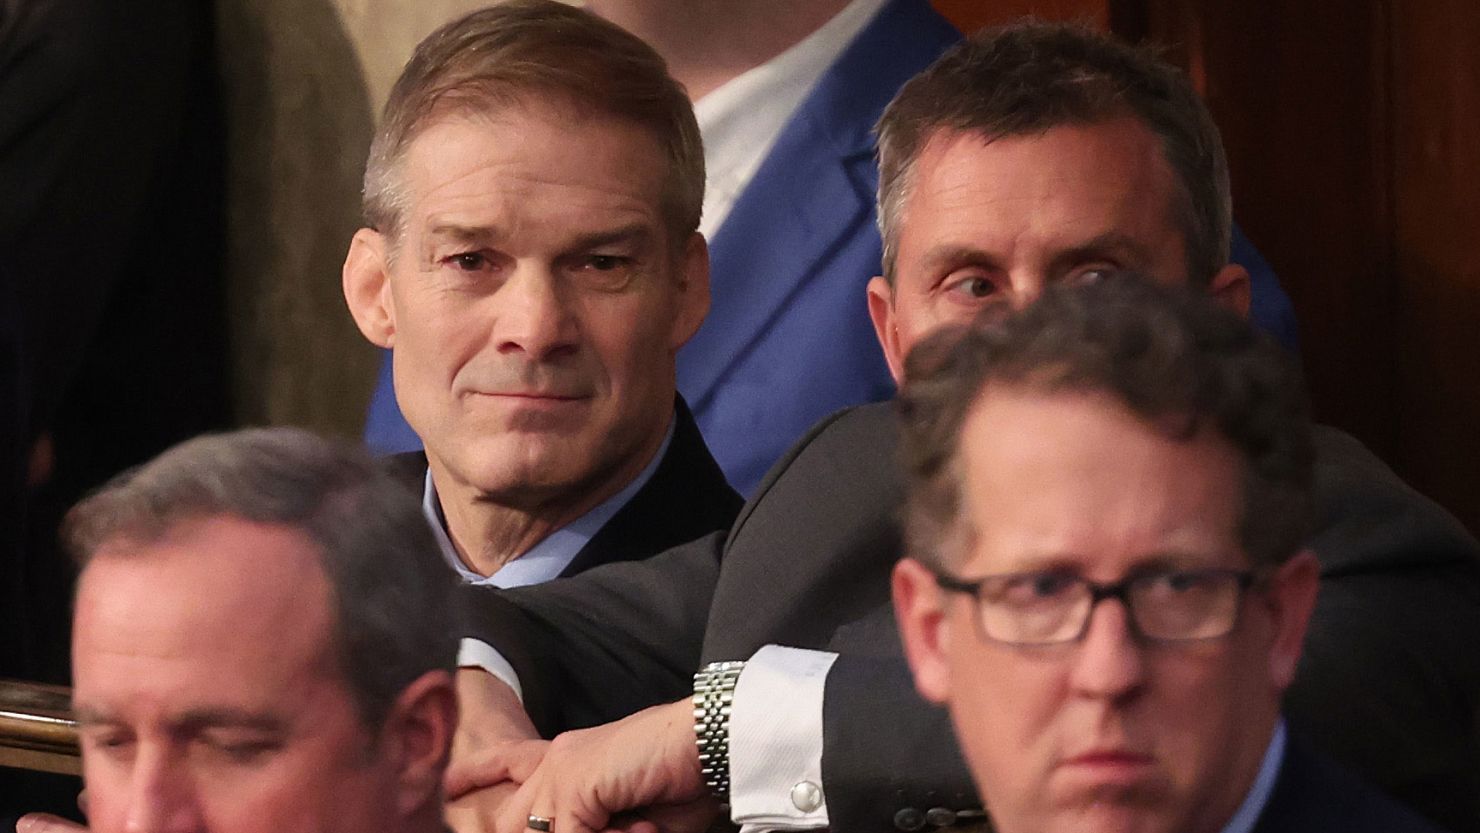 US Rep. Jim Jordan (R-OH) participates in the vote for speaker of the House on the first day of the 118th Congress in the House Chamber of the US Capitol Building on January 03, 2023 in Washington, DC. 